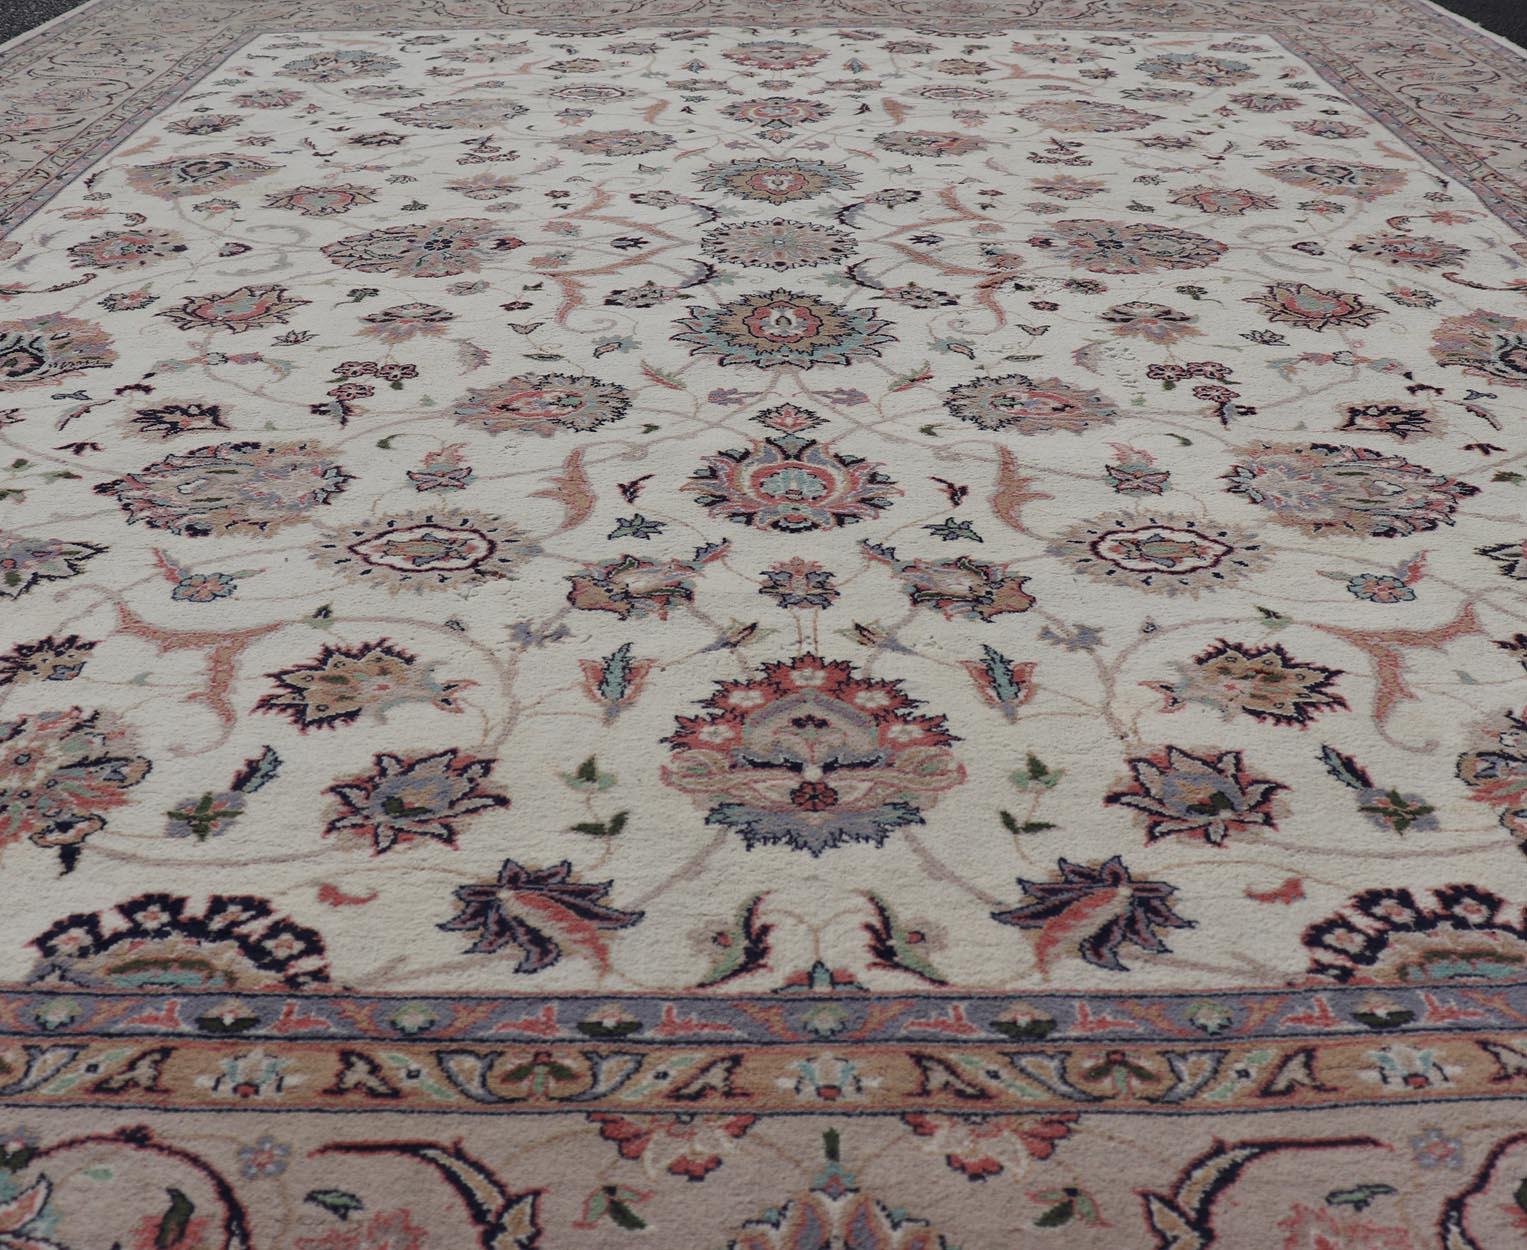  All-Over Floral Design Vintage Persian Tabriz Rug in Soft Colors on Ivory Field. Keivan Woven Arts / rug DSP-2309, country of origin / type: Iran / Tabriz, circa 1960
Measures: 8'0 x 10'6 
This vintage Persian Tabriz carpet (circa 1970) features a